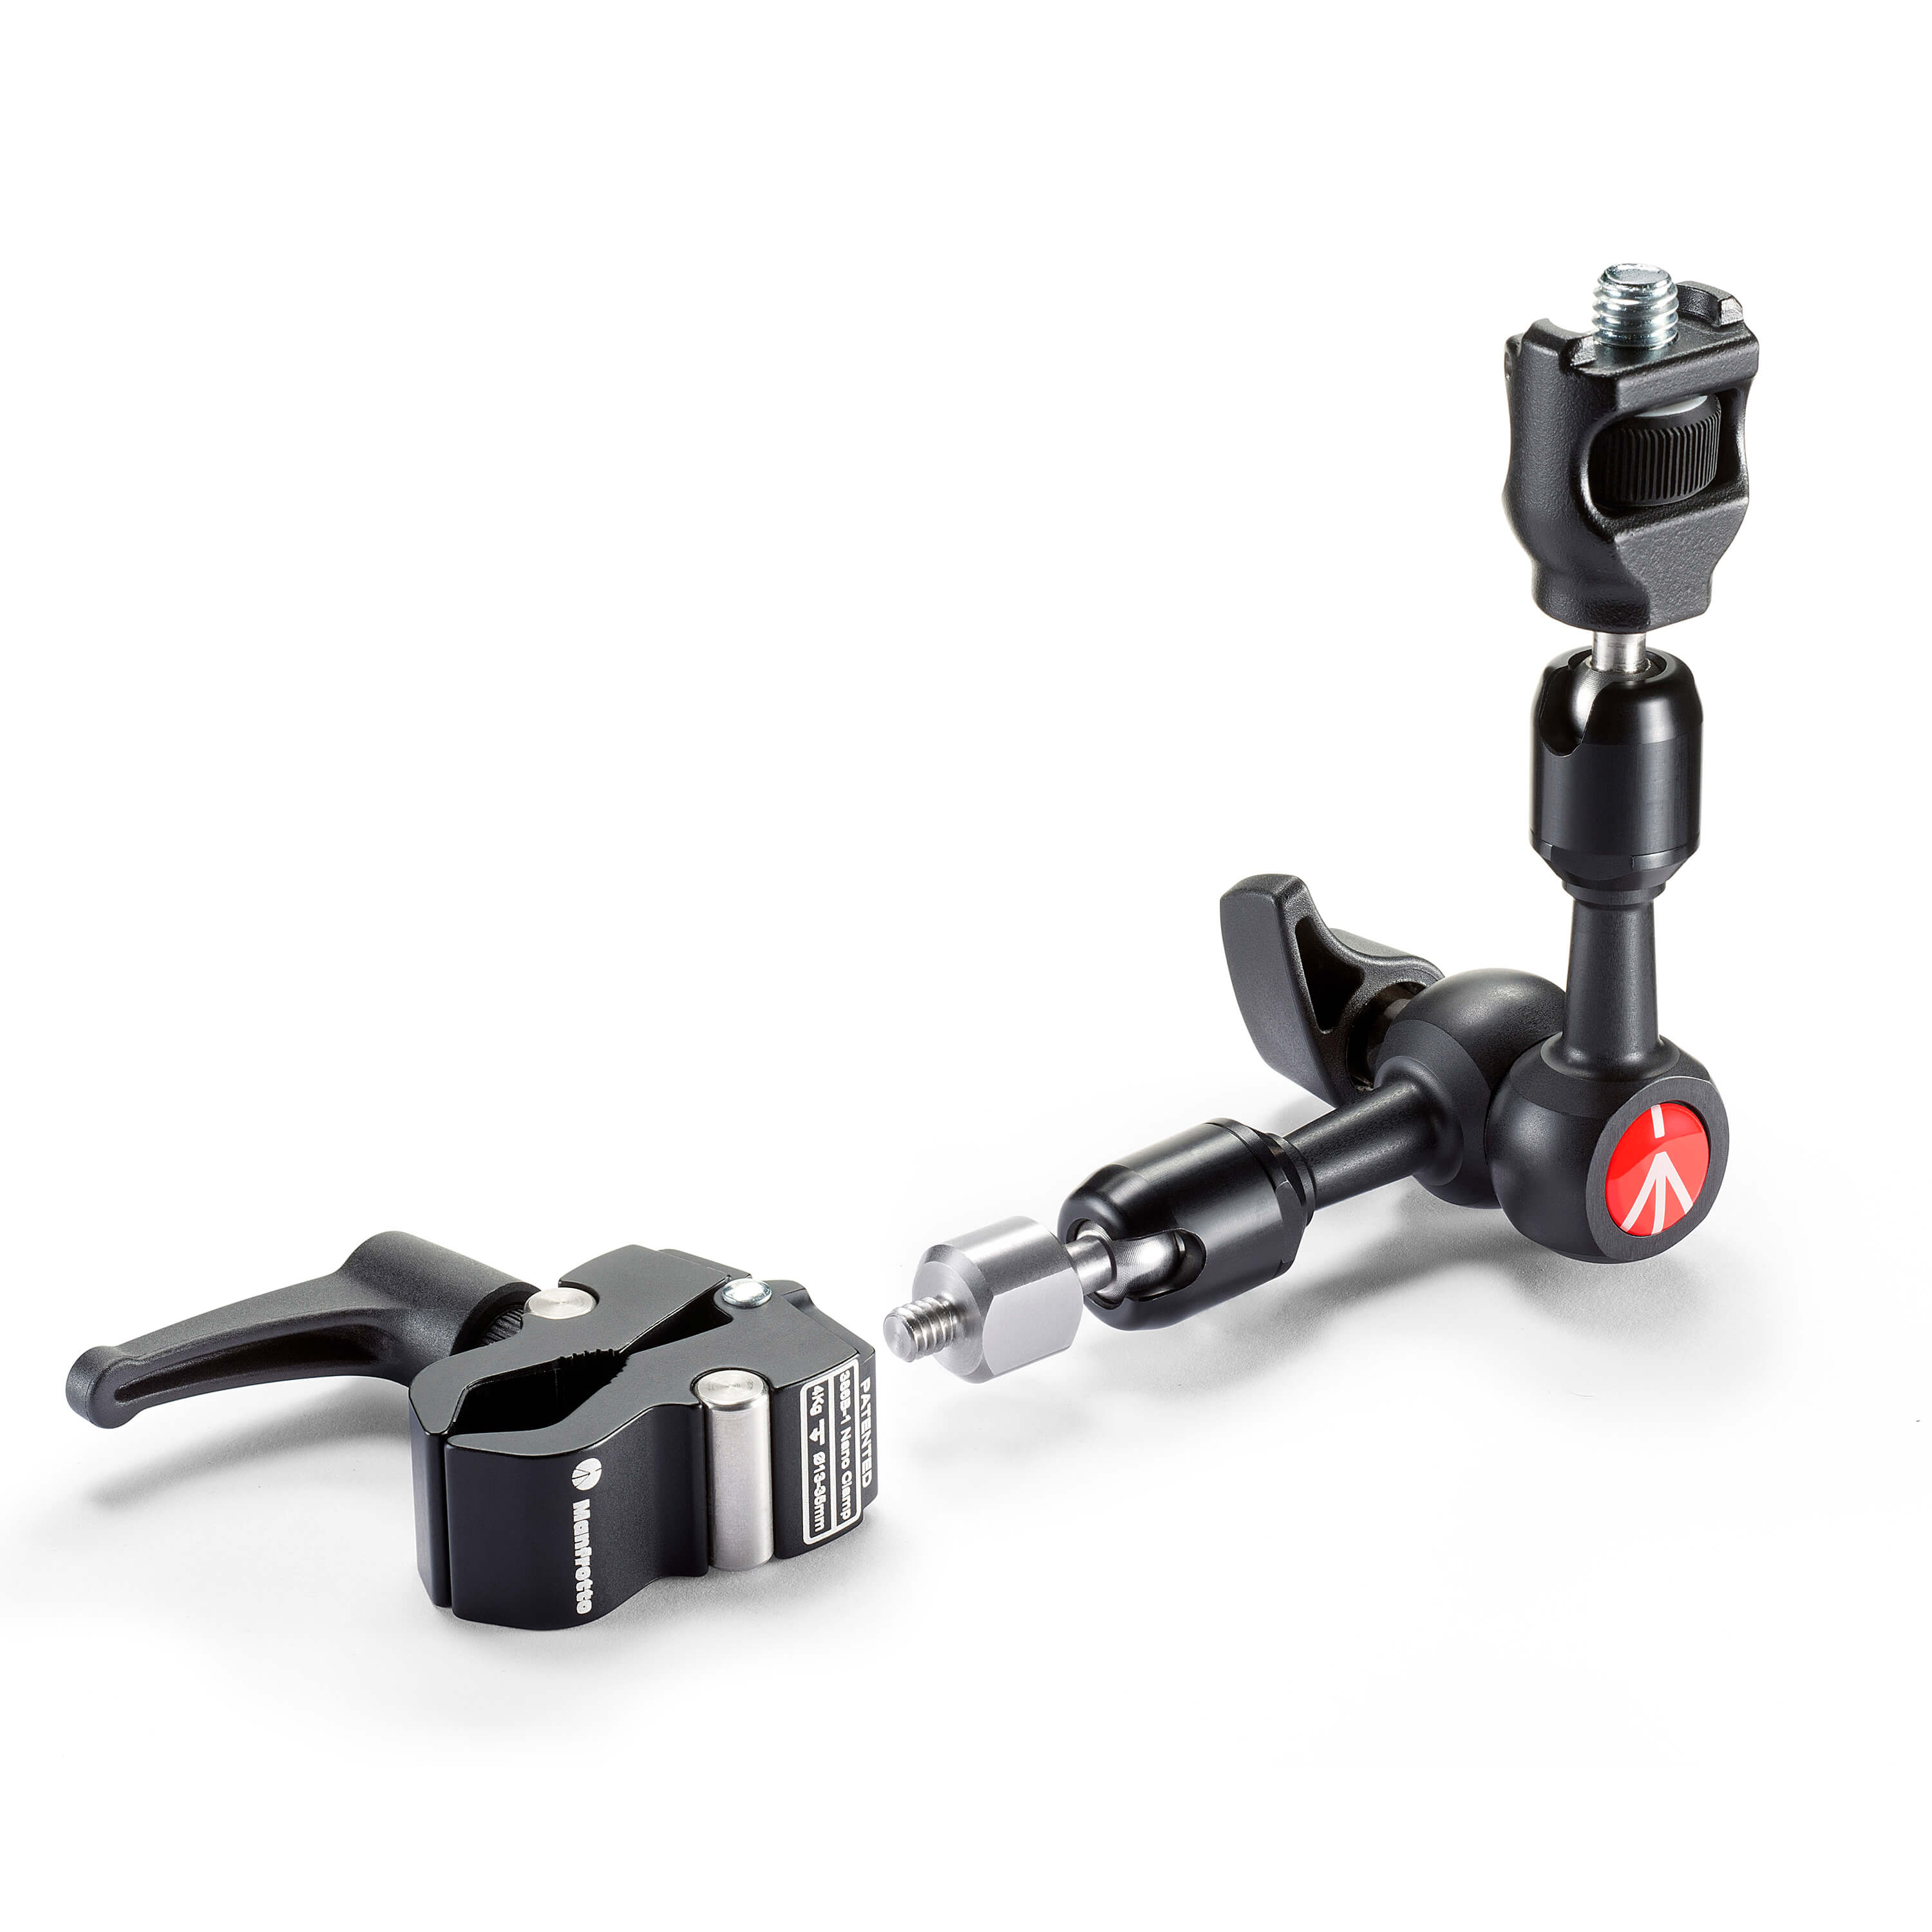 MANFROTTO Friction Arm Kit 244 + 386-B1 Nano Clamp